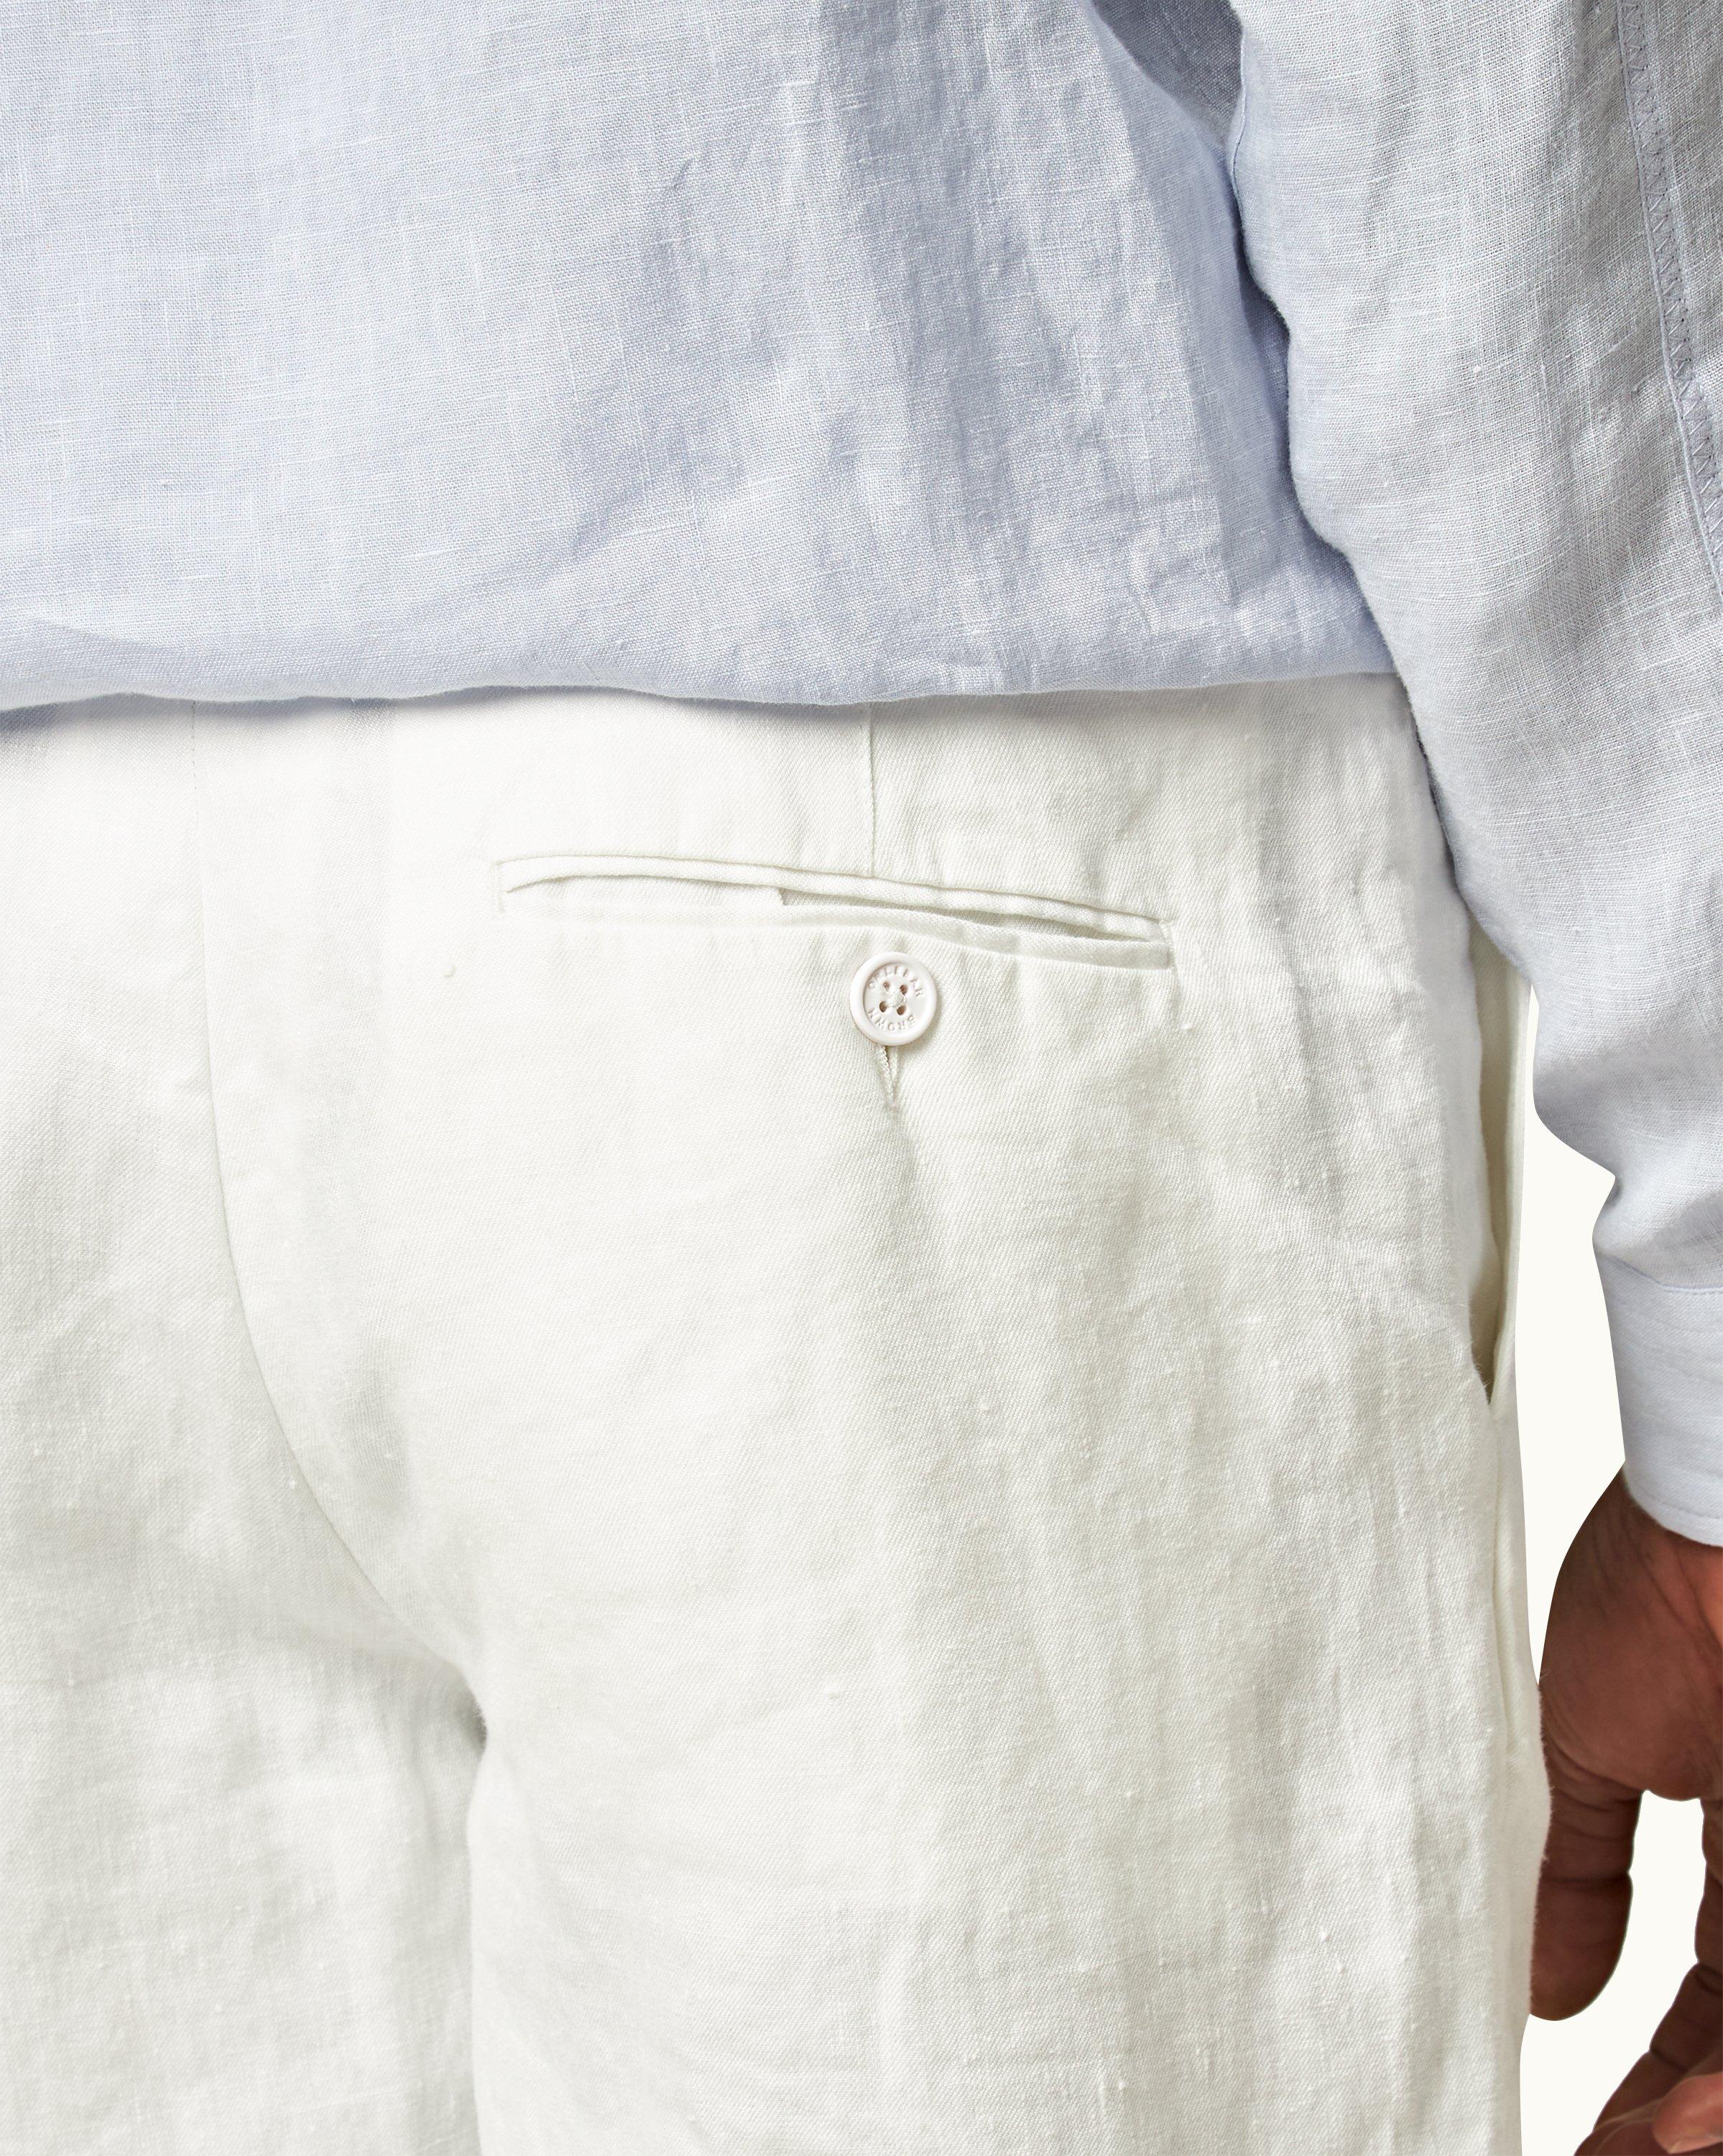 Orlebar Brown  White Tailored Fit Washed Linen Trousers